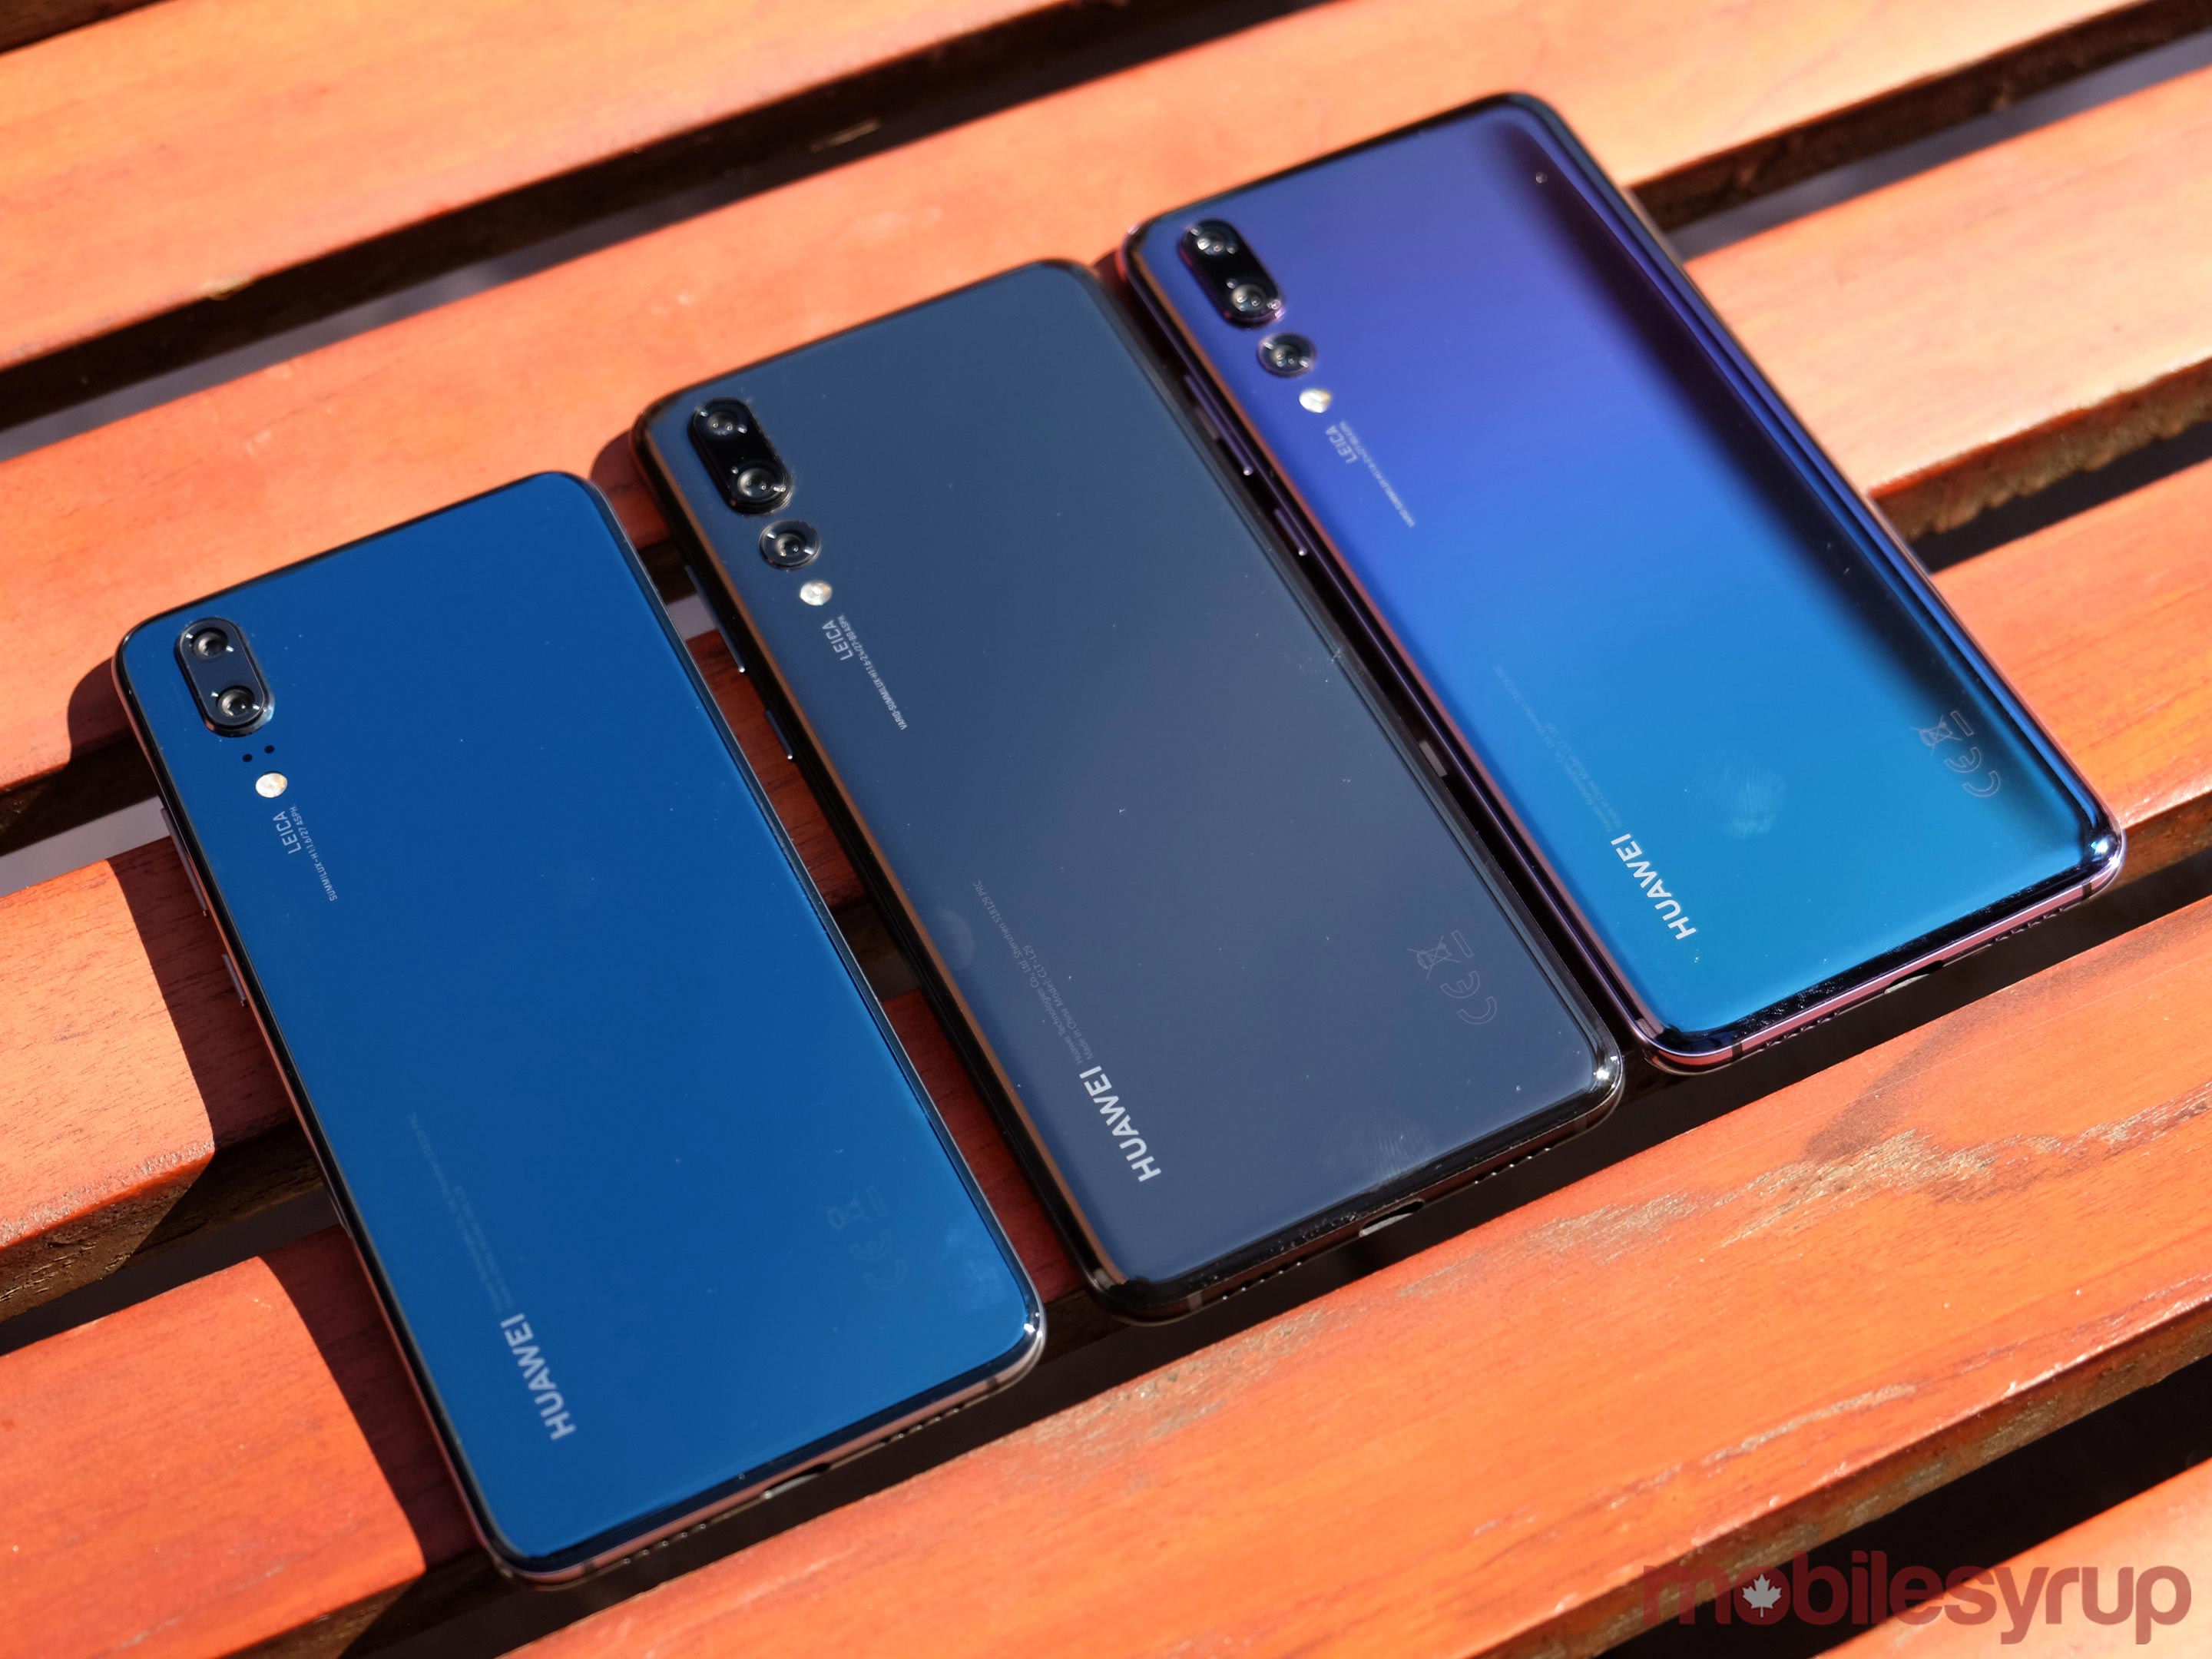 Huawei P20 line-up